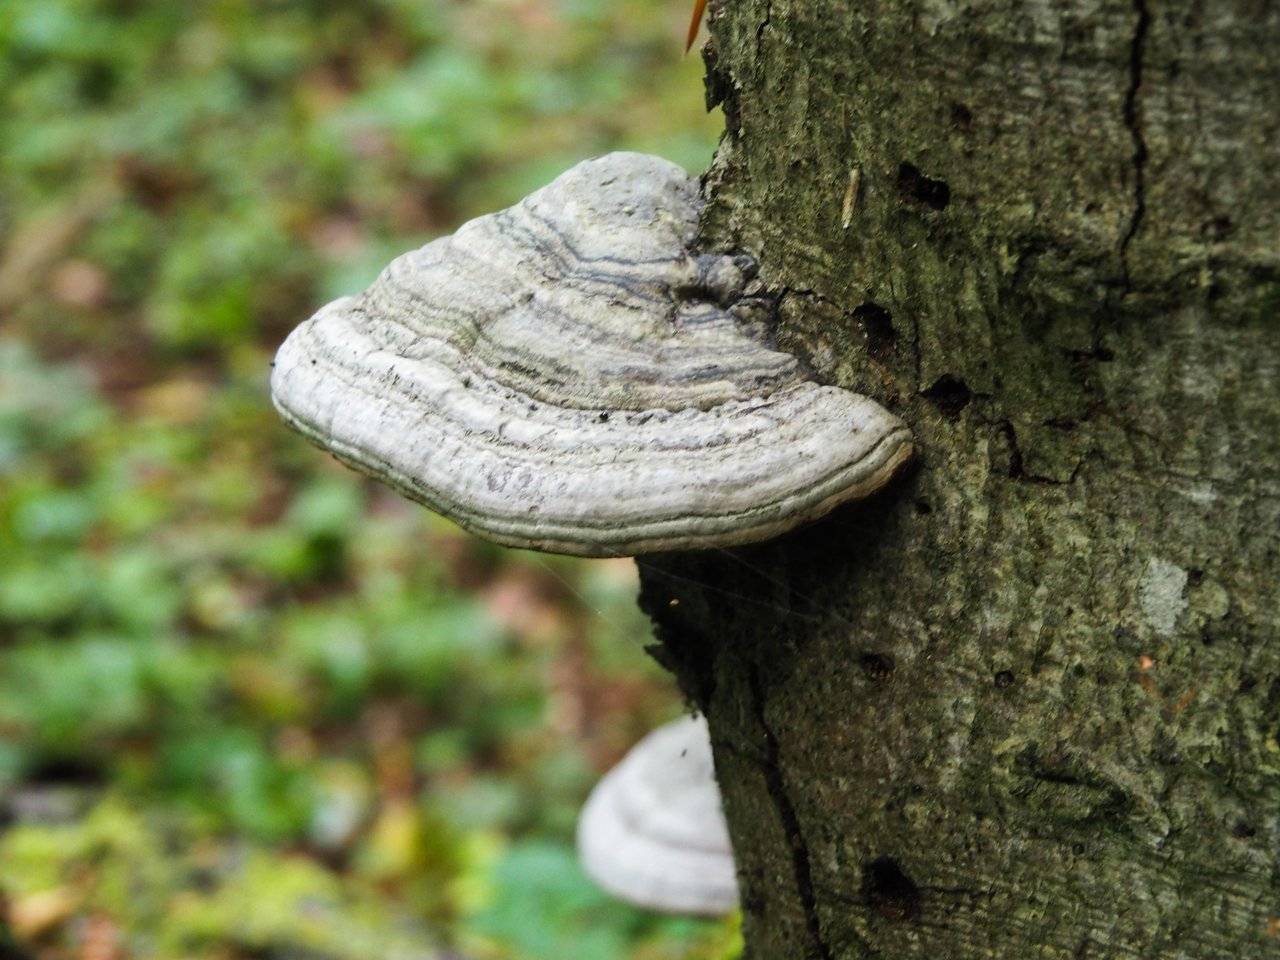 Fomes fomentarius from another angle